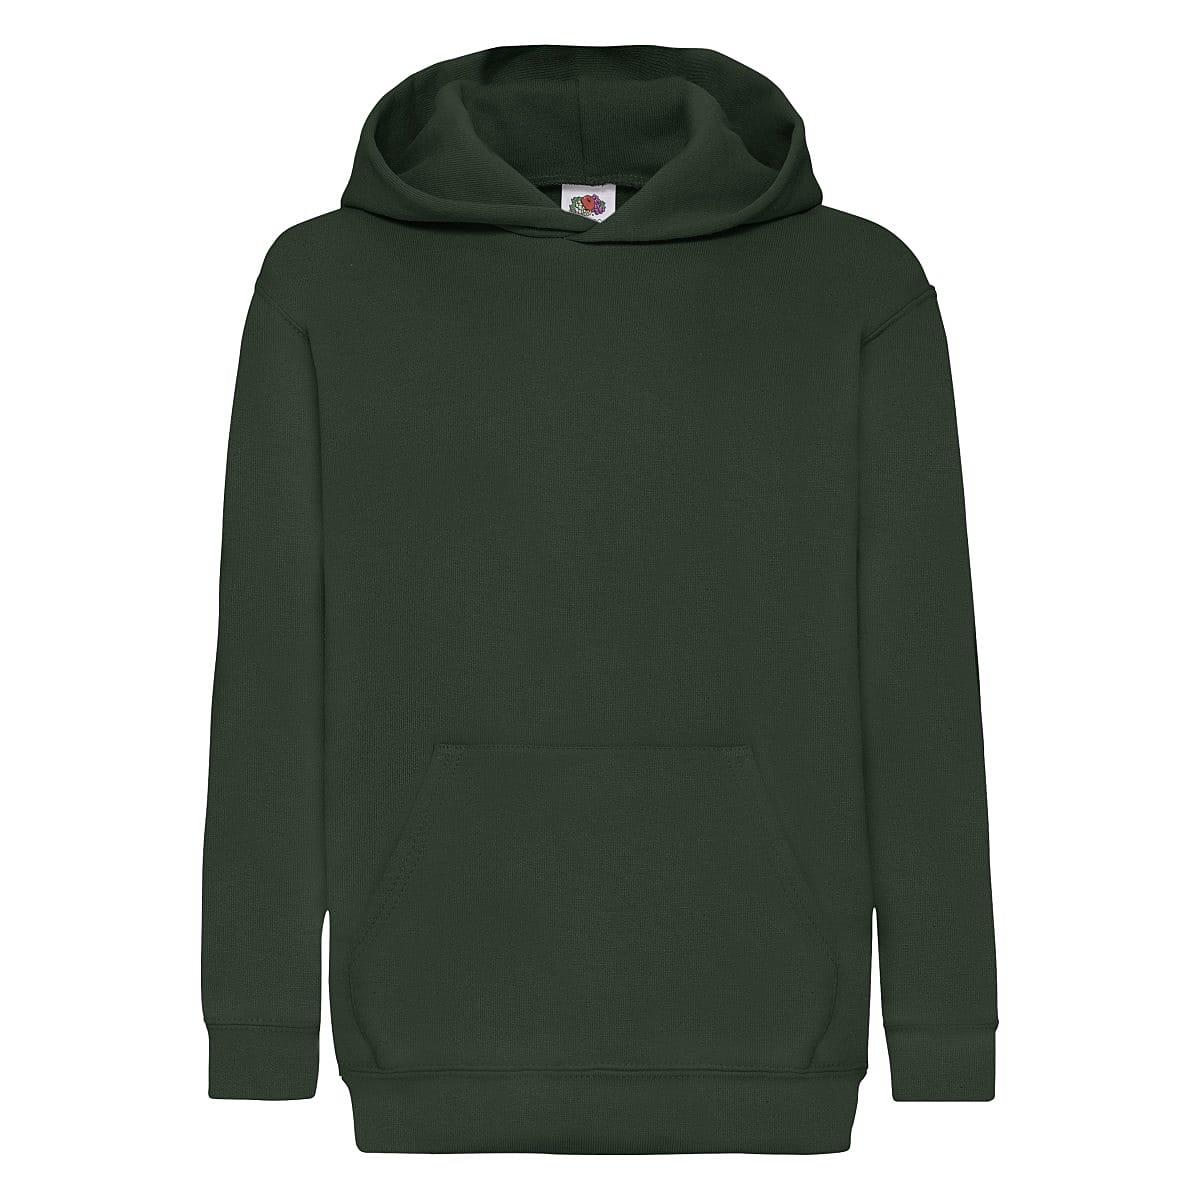 Fruit Of The Loom Childrens Hoodie in Bottle Green (Product Code: 62043)